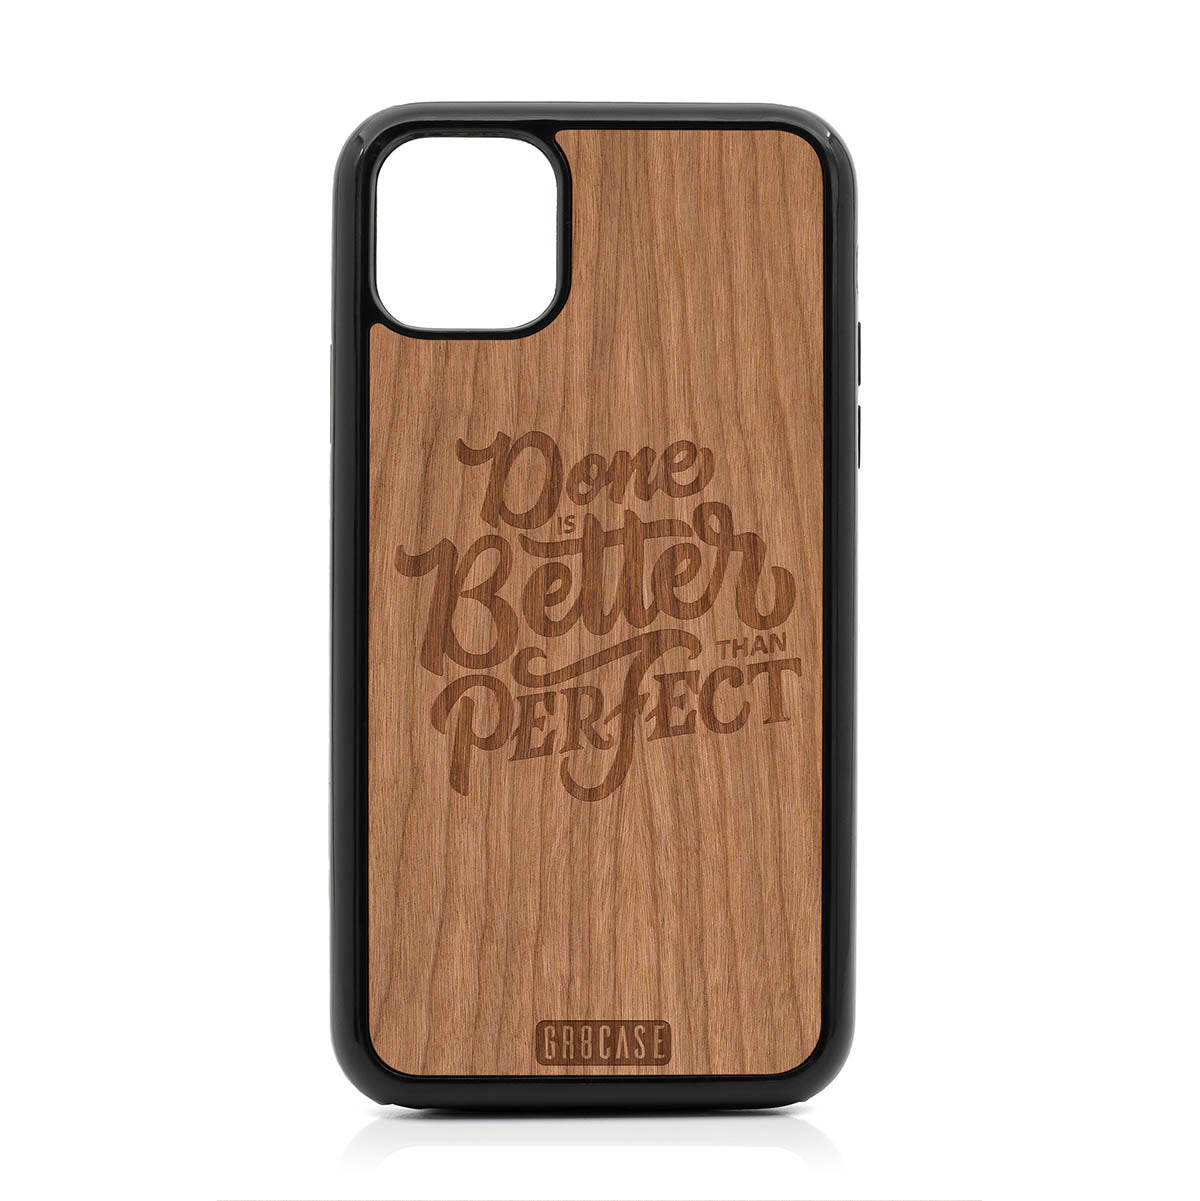 Done Is Better Than Perfect Design Wood Case For iPhone 11 Pro Max by GR8CASE